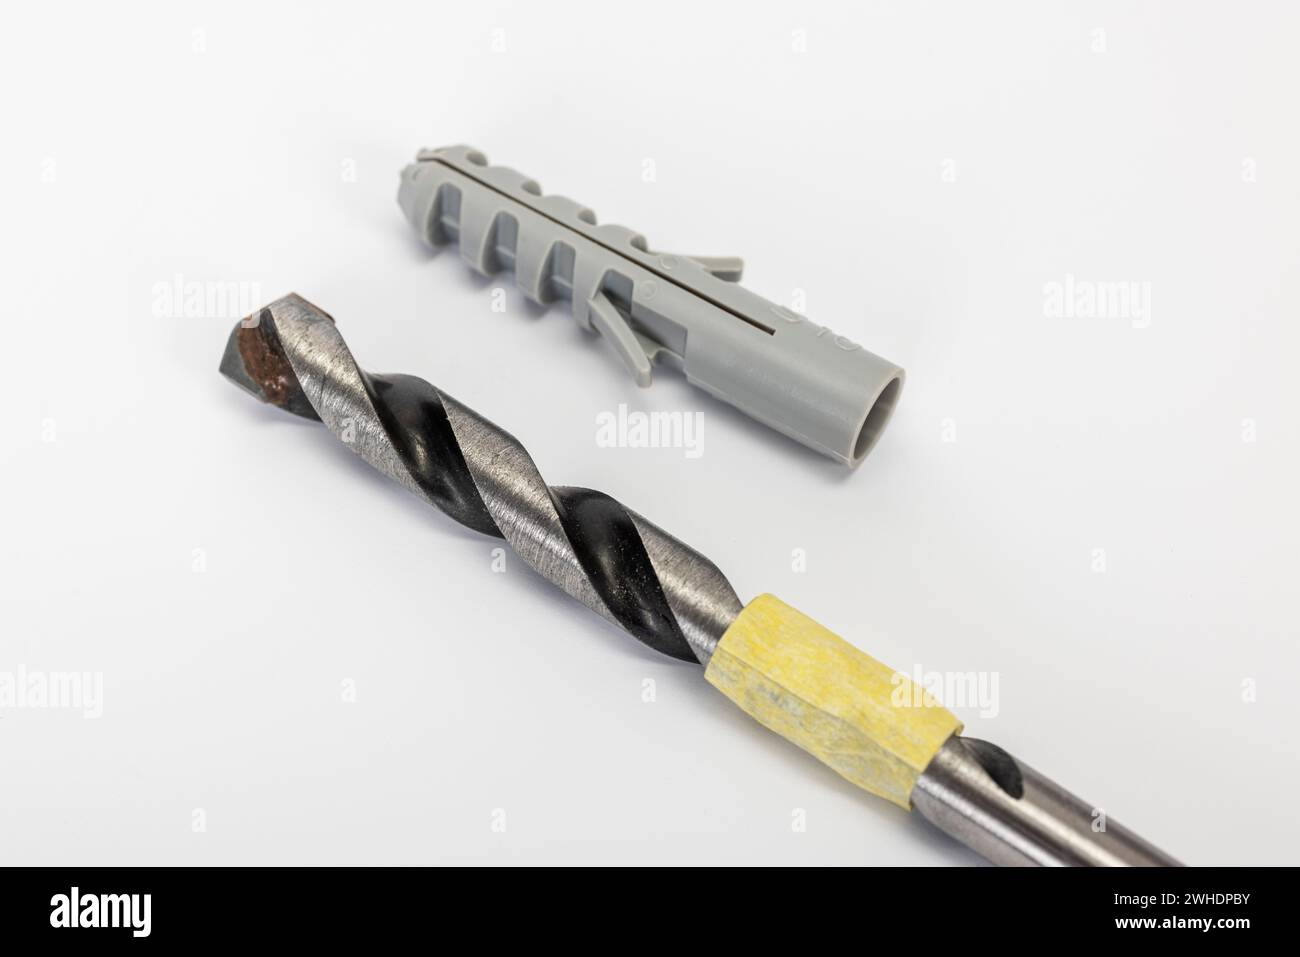 Stone drill marked with masking tape, drilling depth for the adjacent dowel, detail, white background, Stock Photo